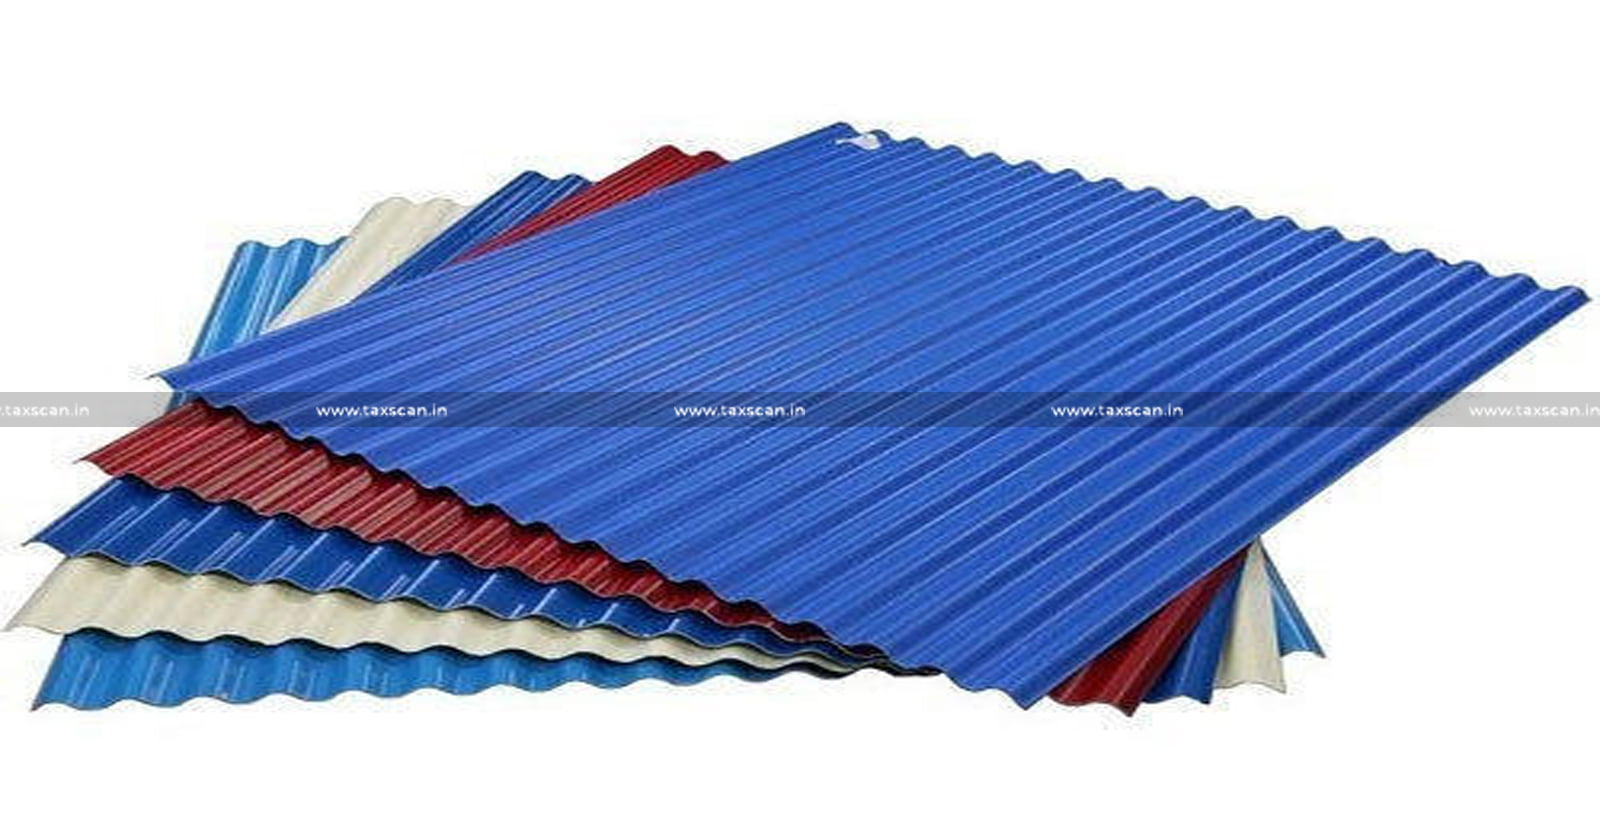 GST - GST Applicable - Corrugated Sheets - AAR - taxscan